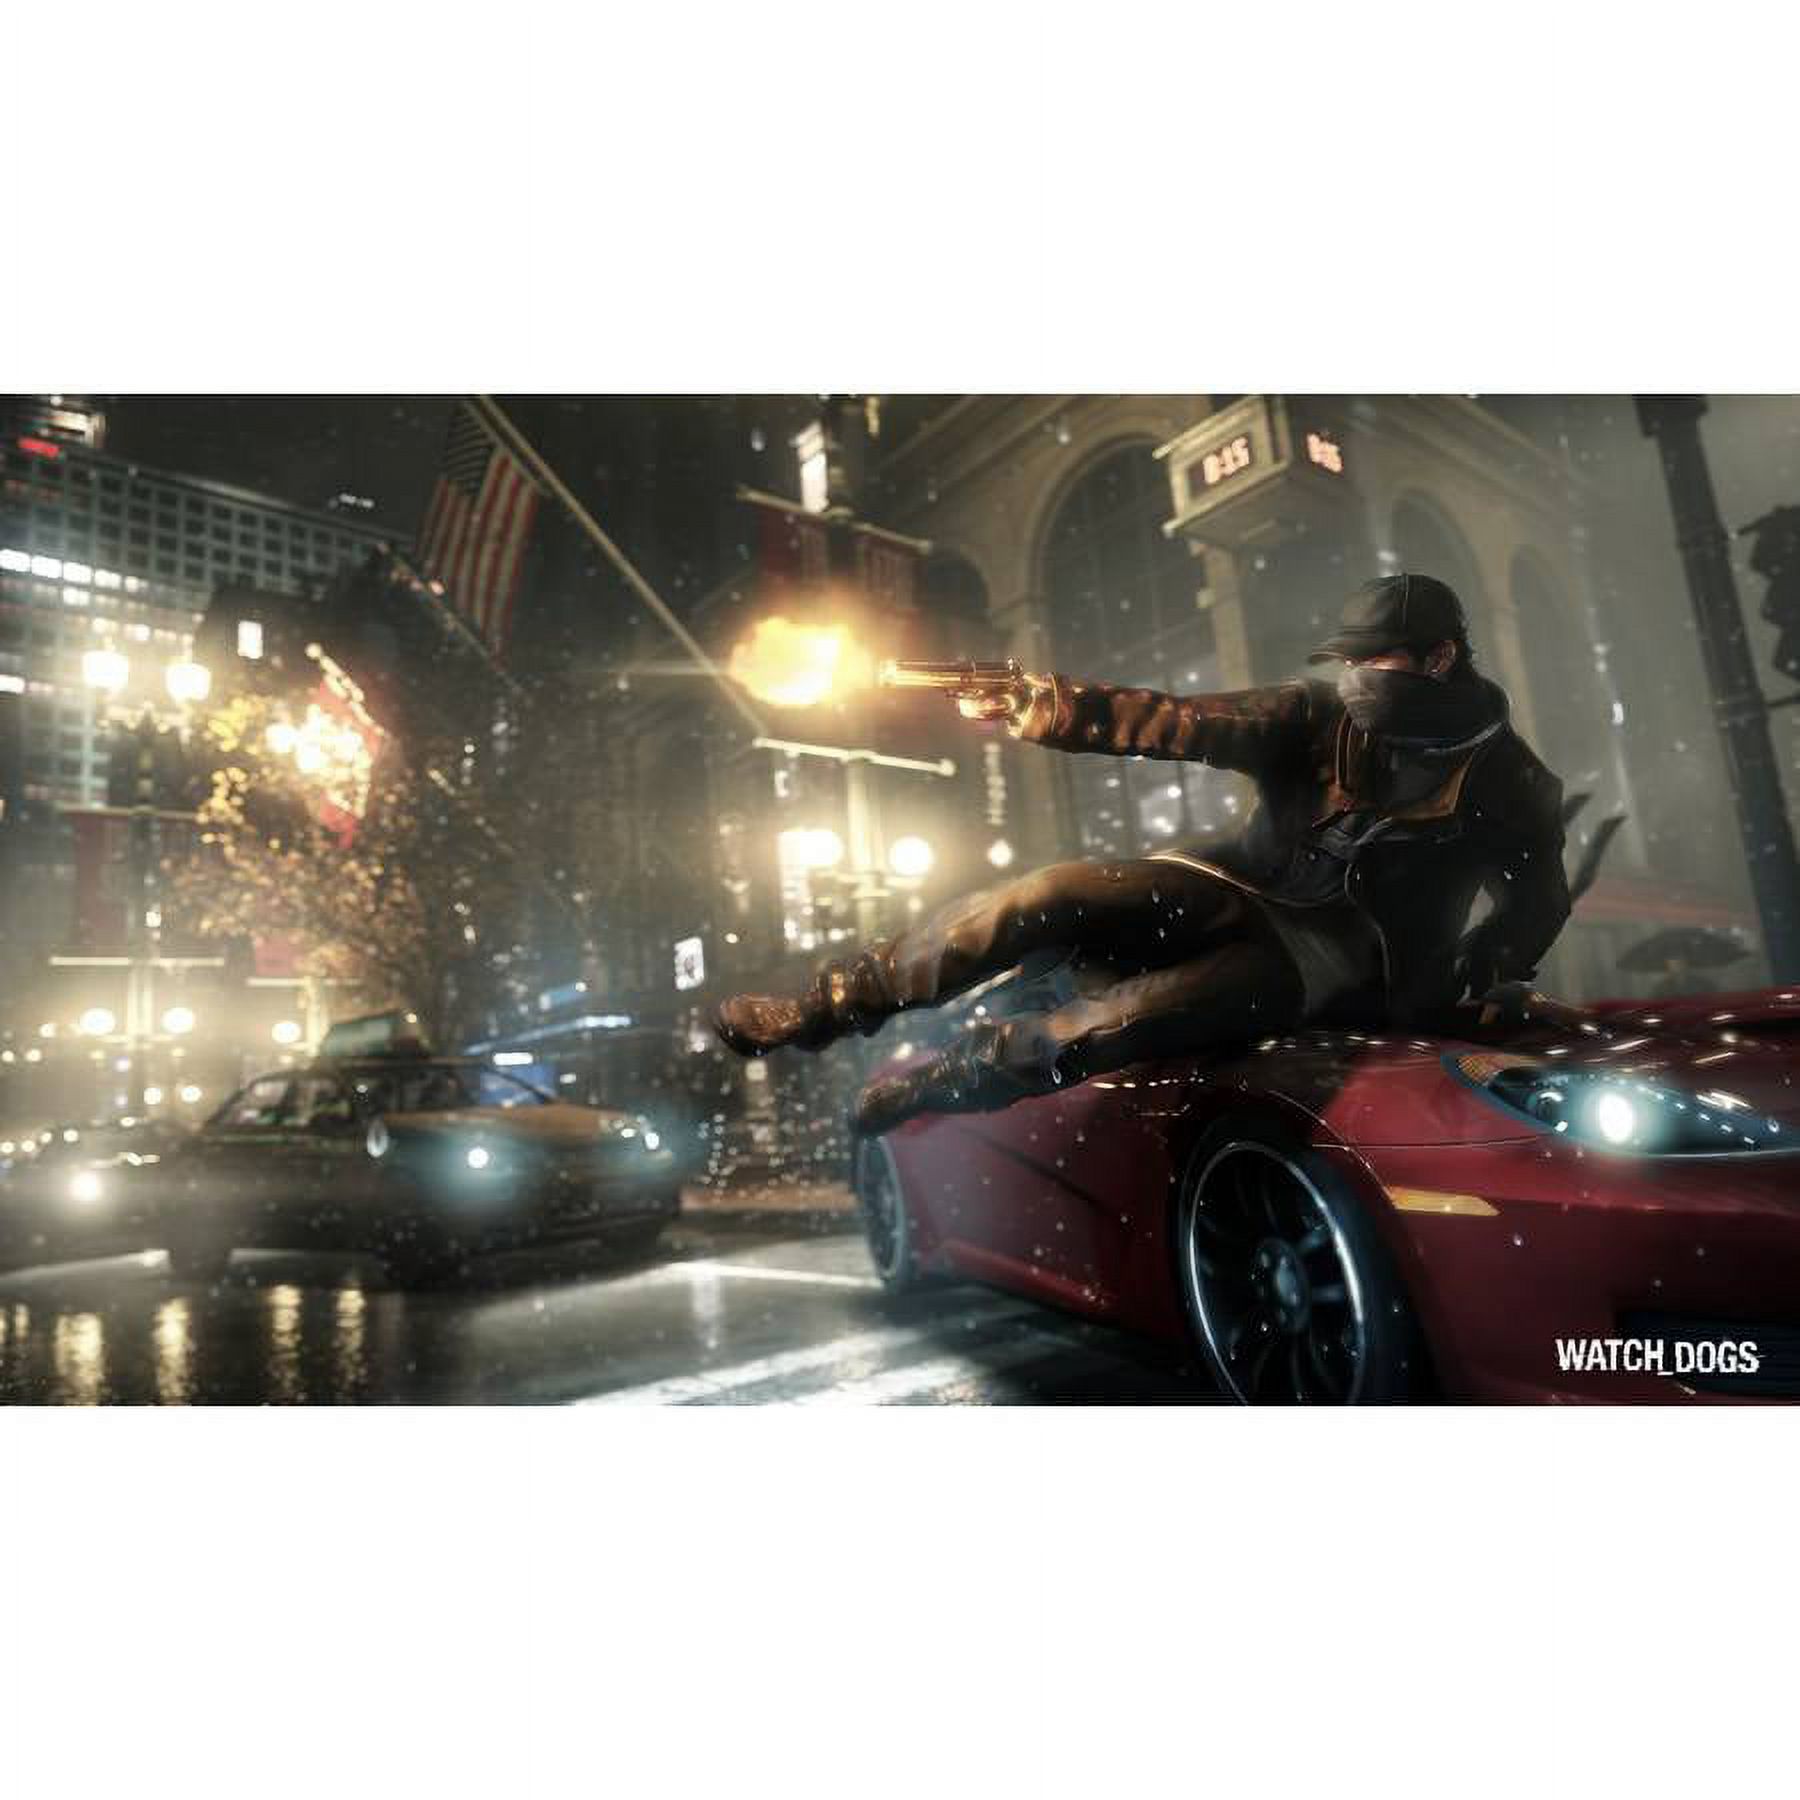 Watch Dogs - image 5 of 6